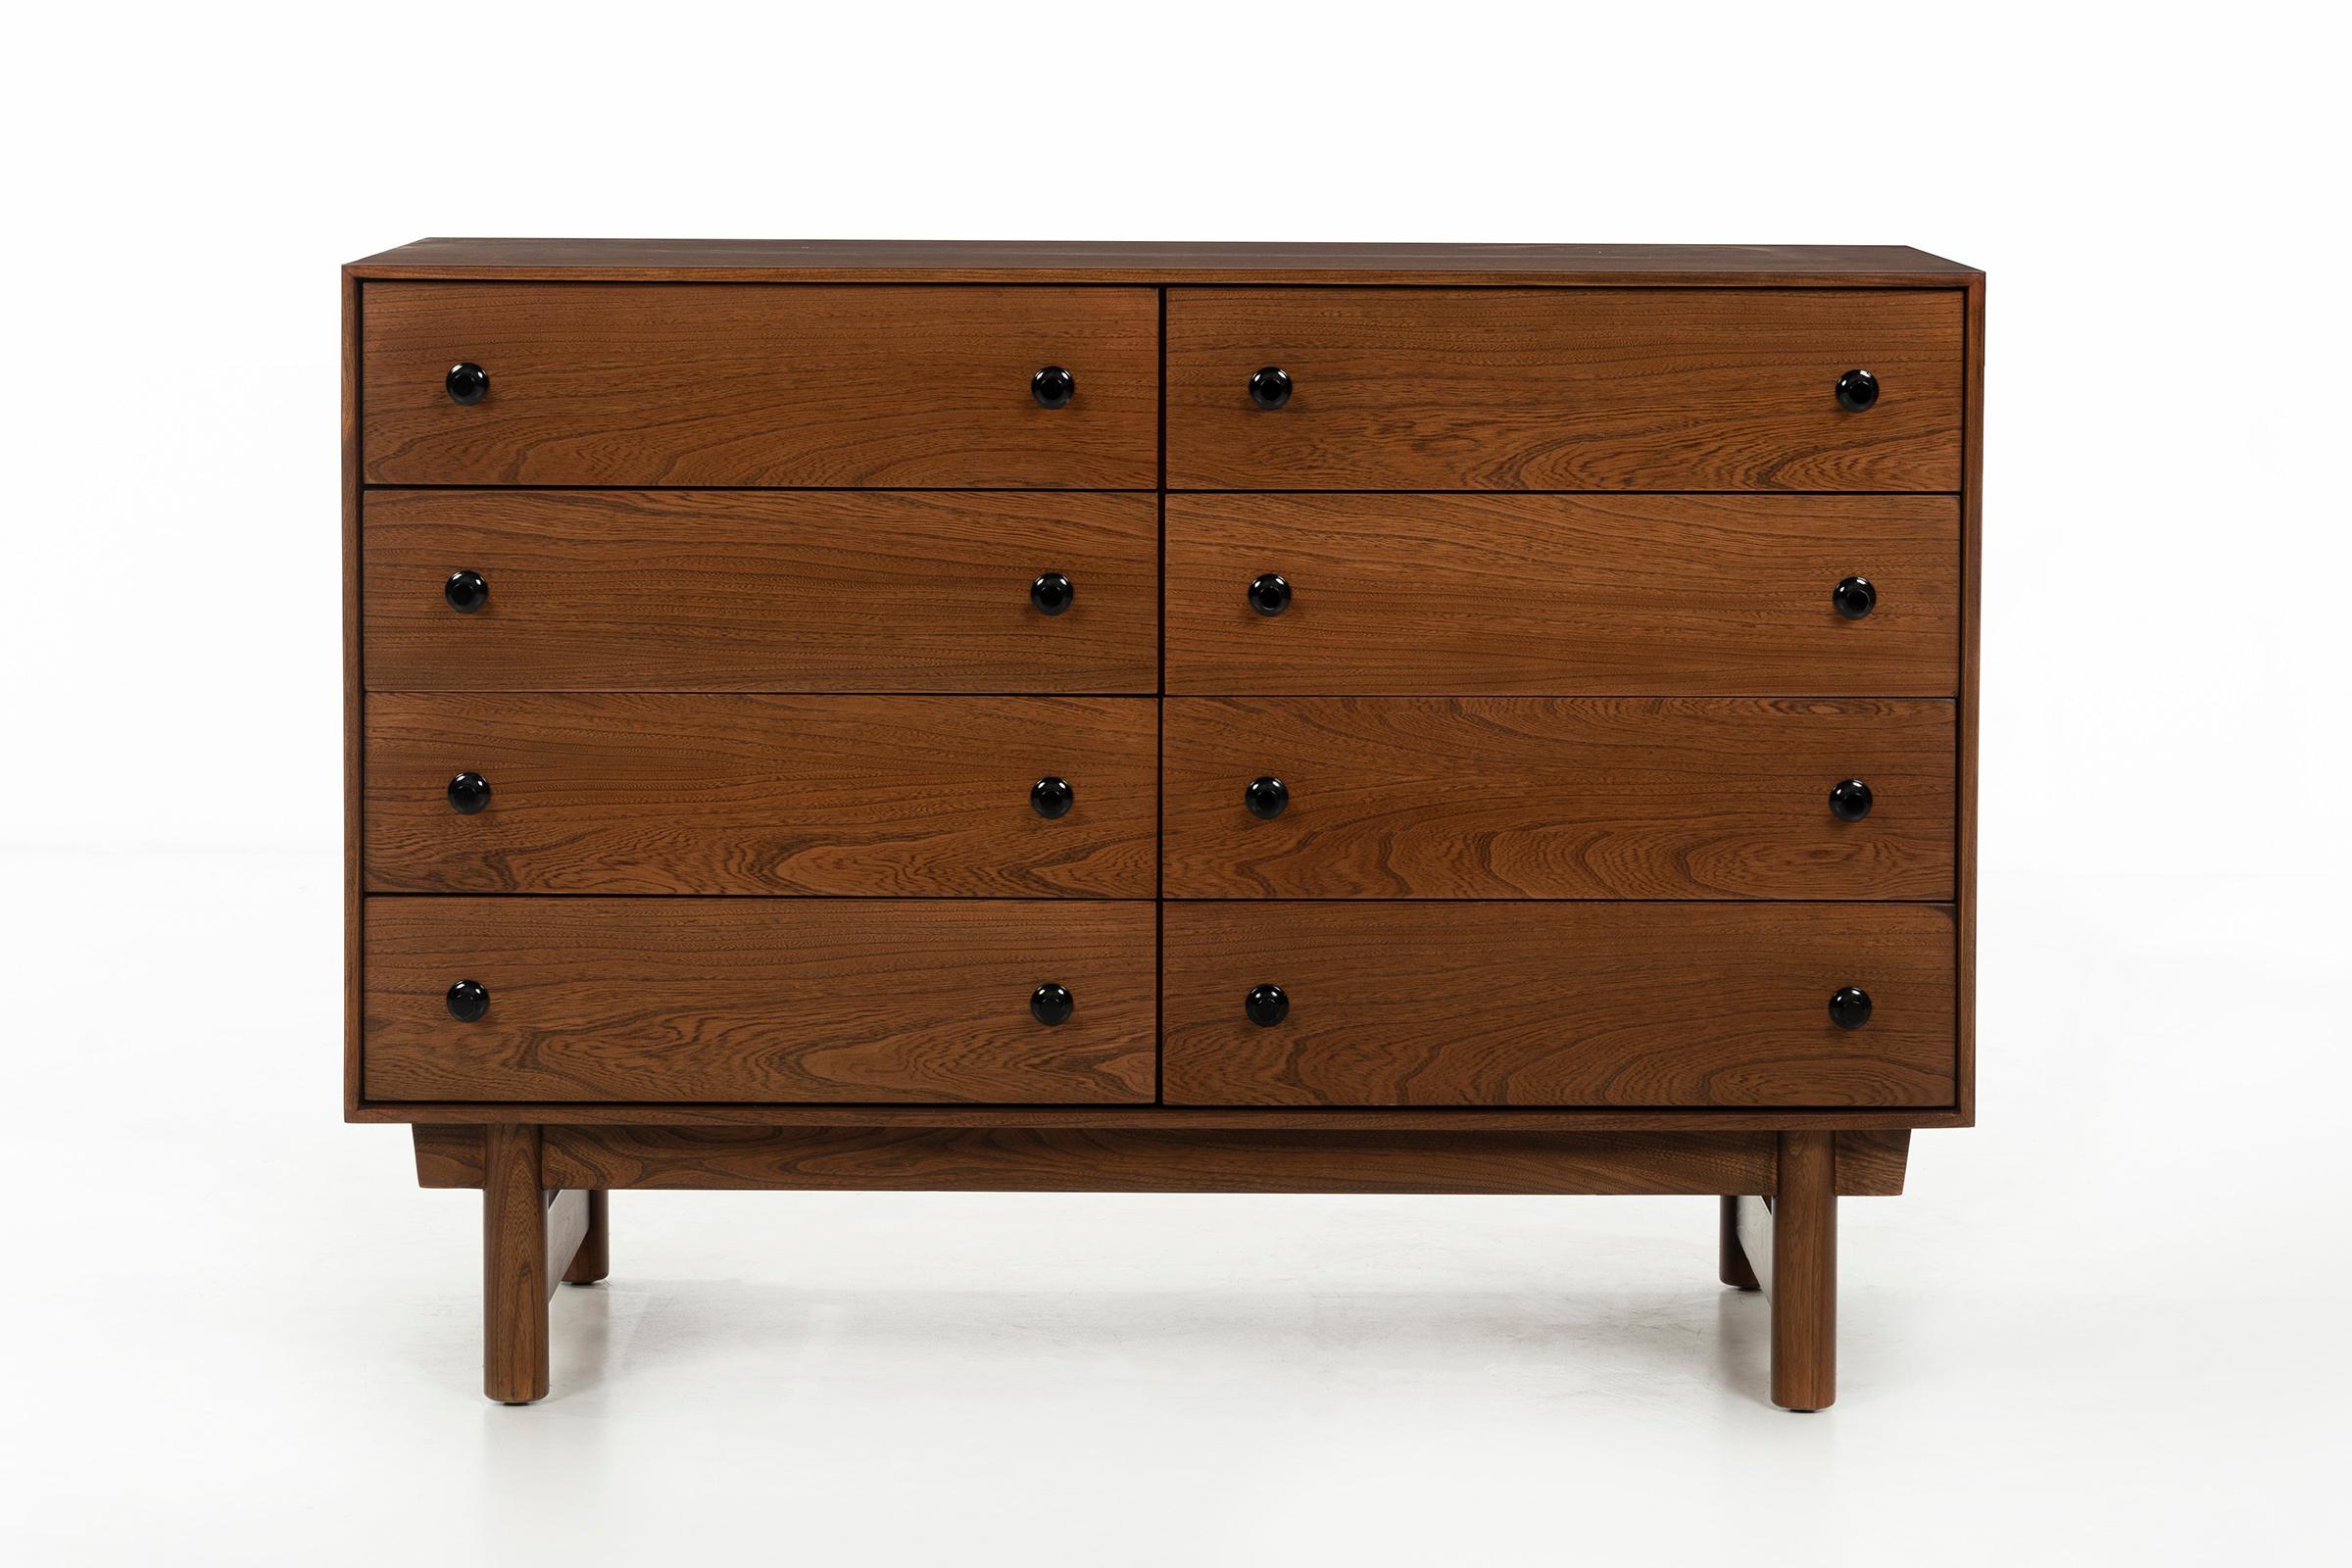 Lawrence Peabody for Richardson Brothers compact double dresser with lacquered metal drawer pulls.